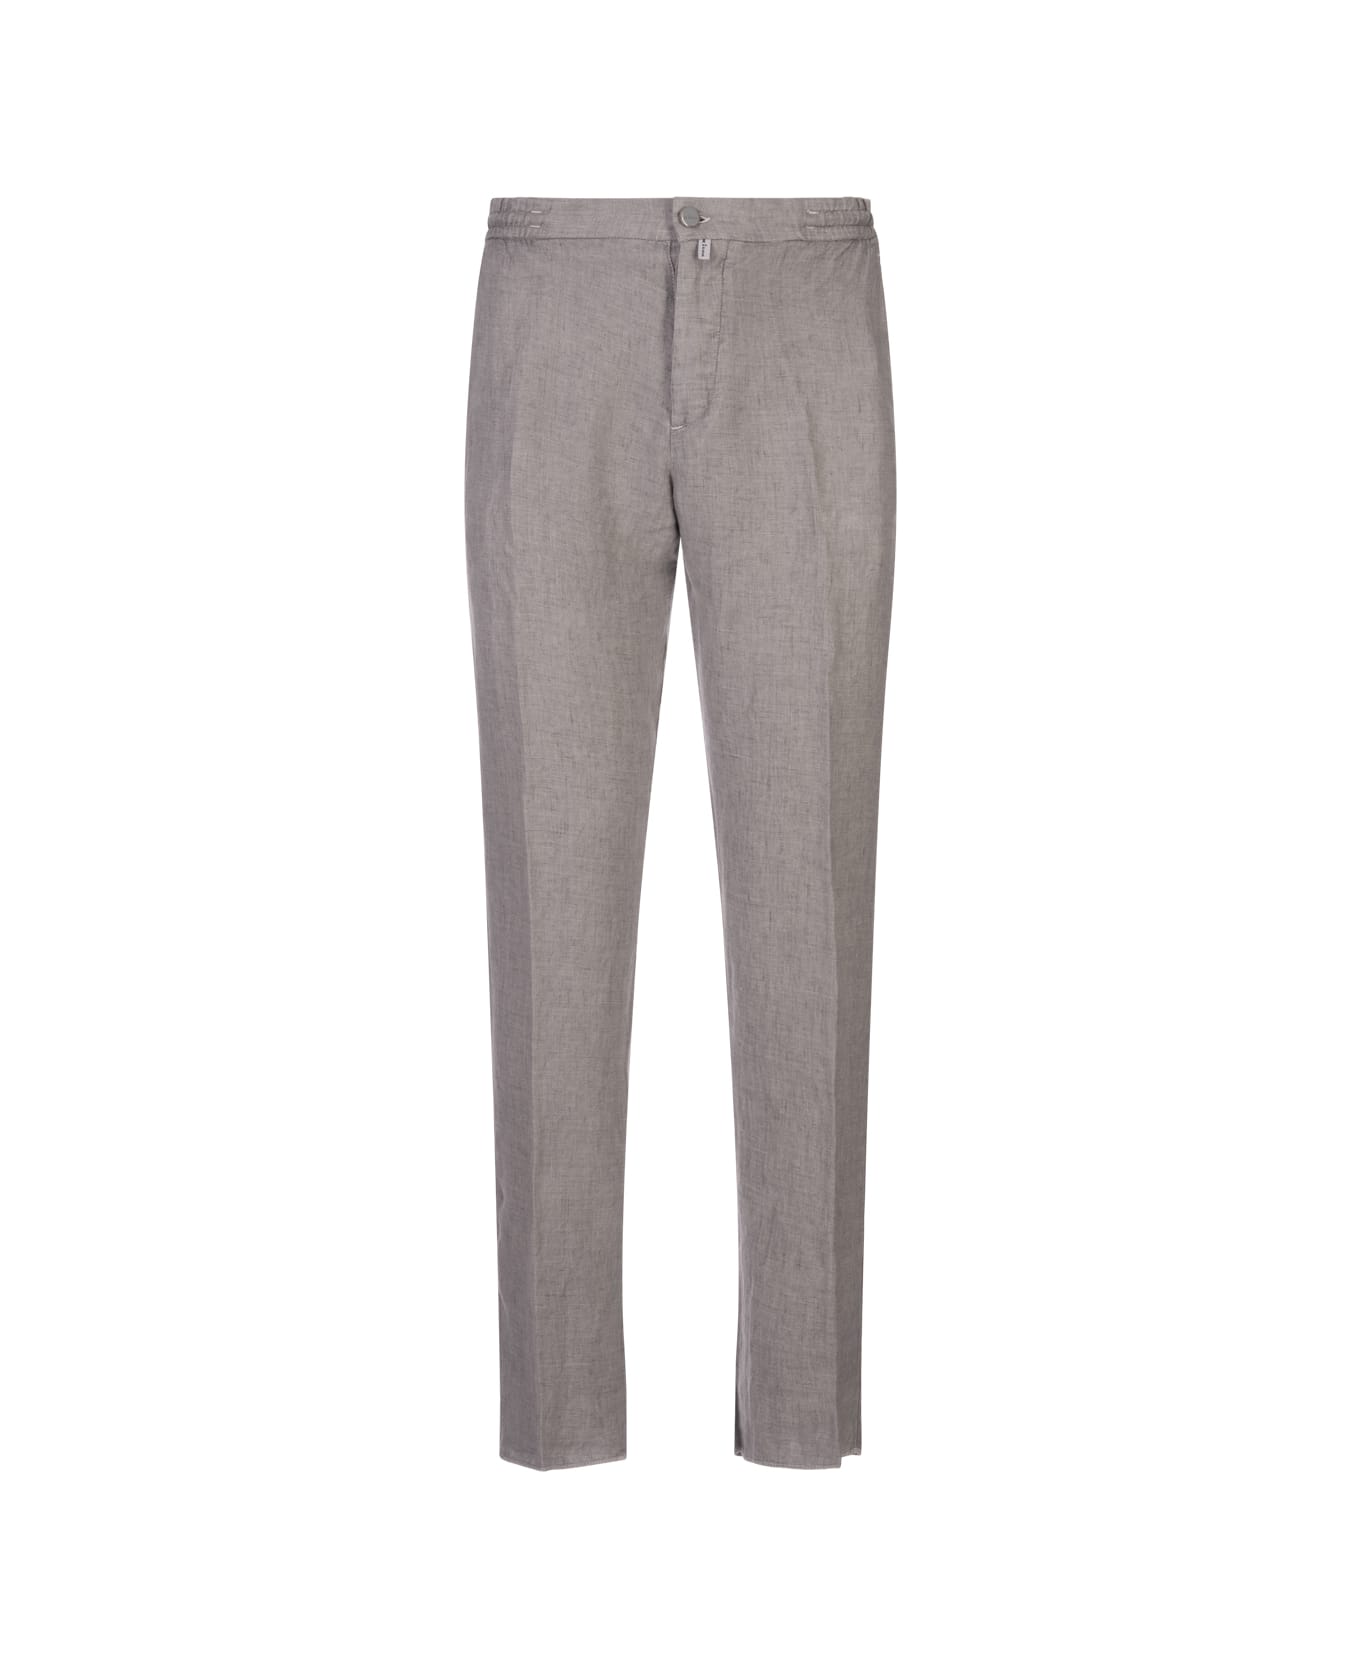 Kiton Grey Linen Trousers With Elasticised Waistband - Grey